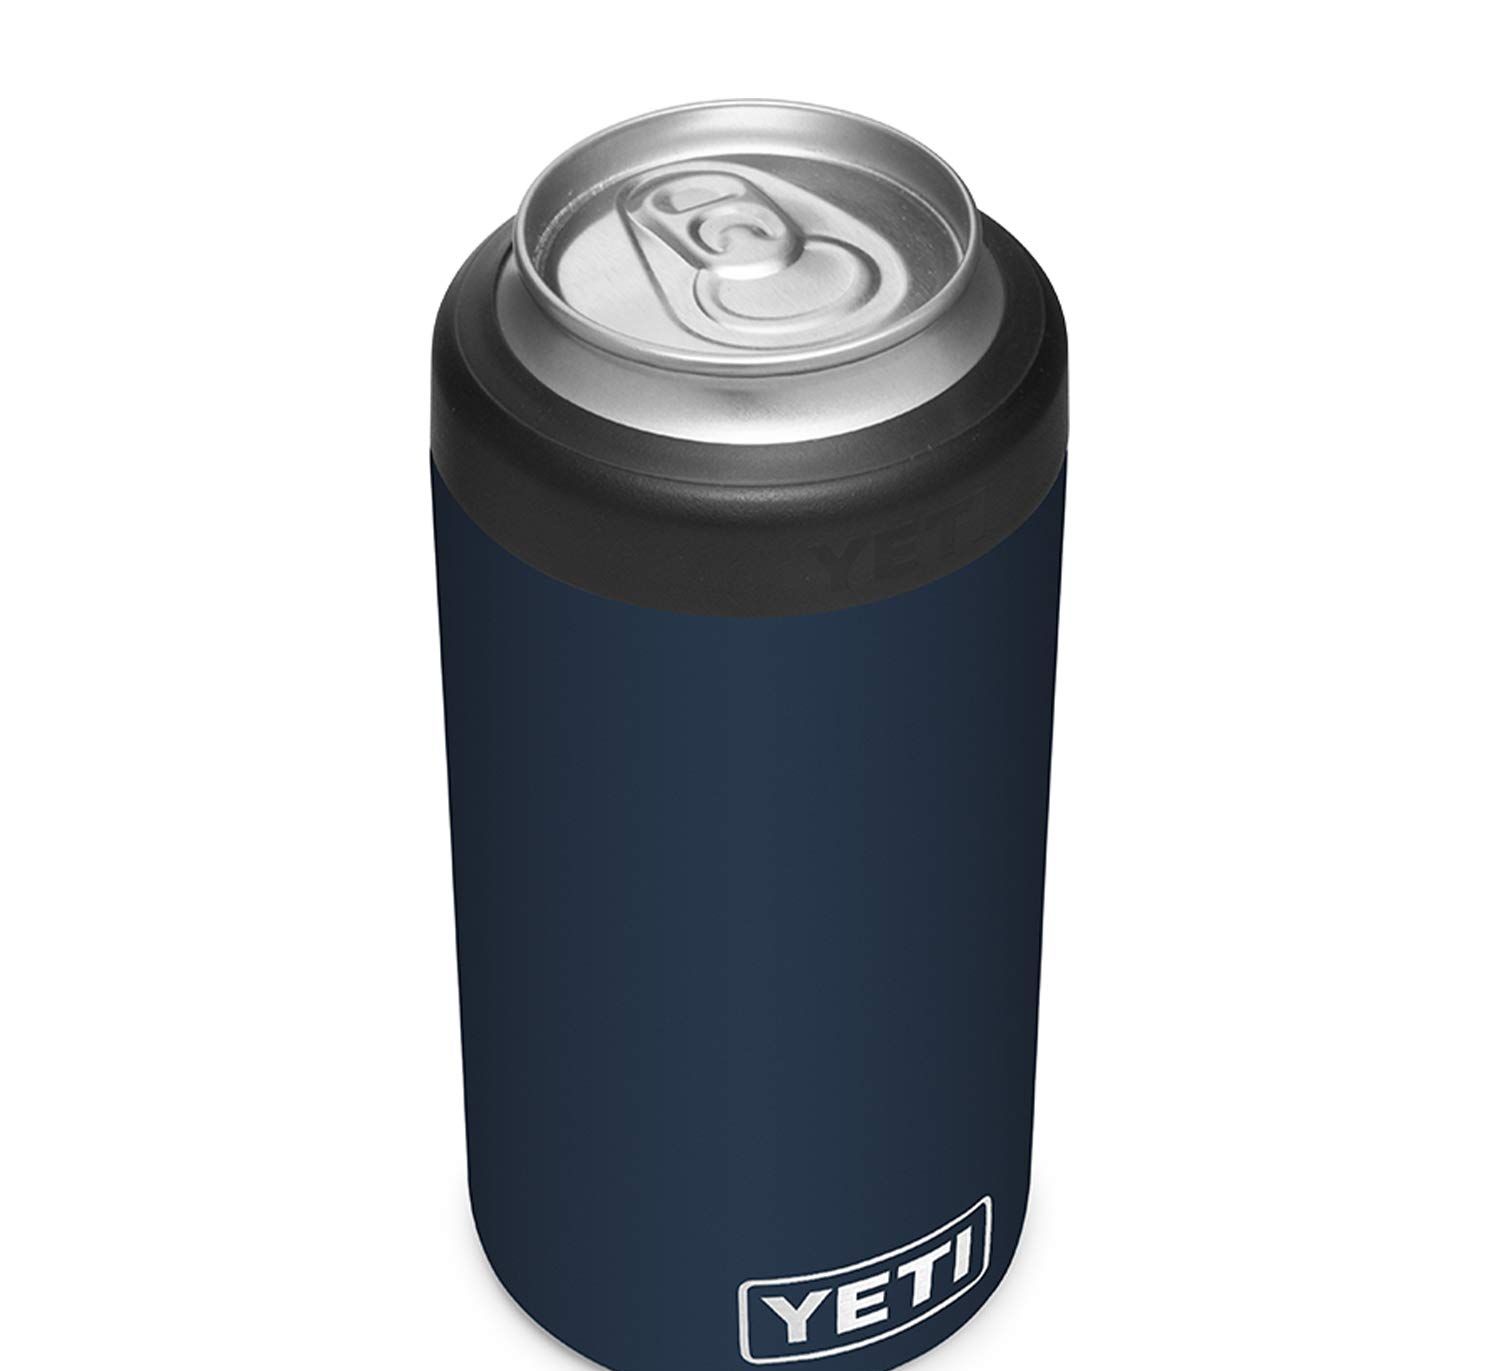 Yeti Just Dropped 4 New Rambler Drinkware Items, and Prices Start at $20